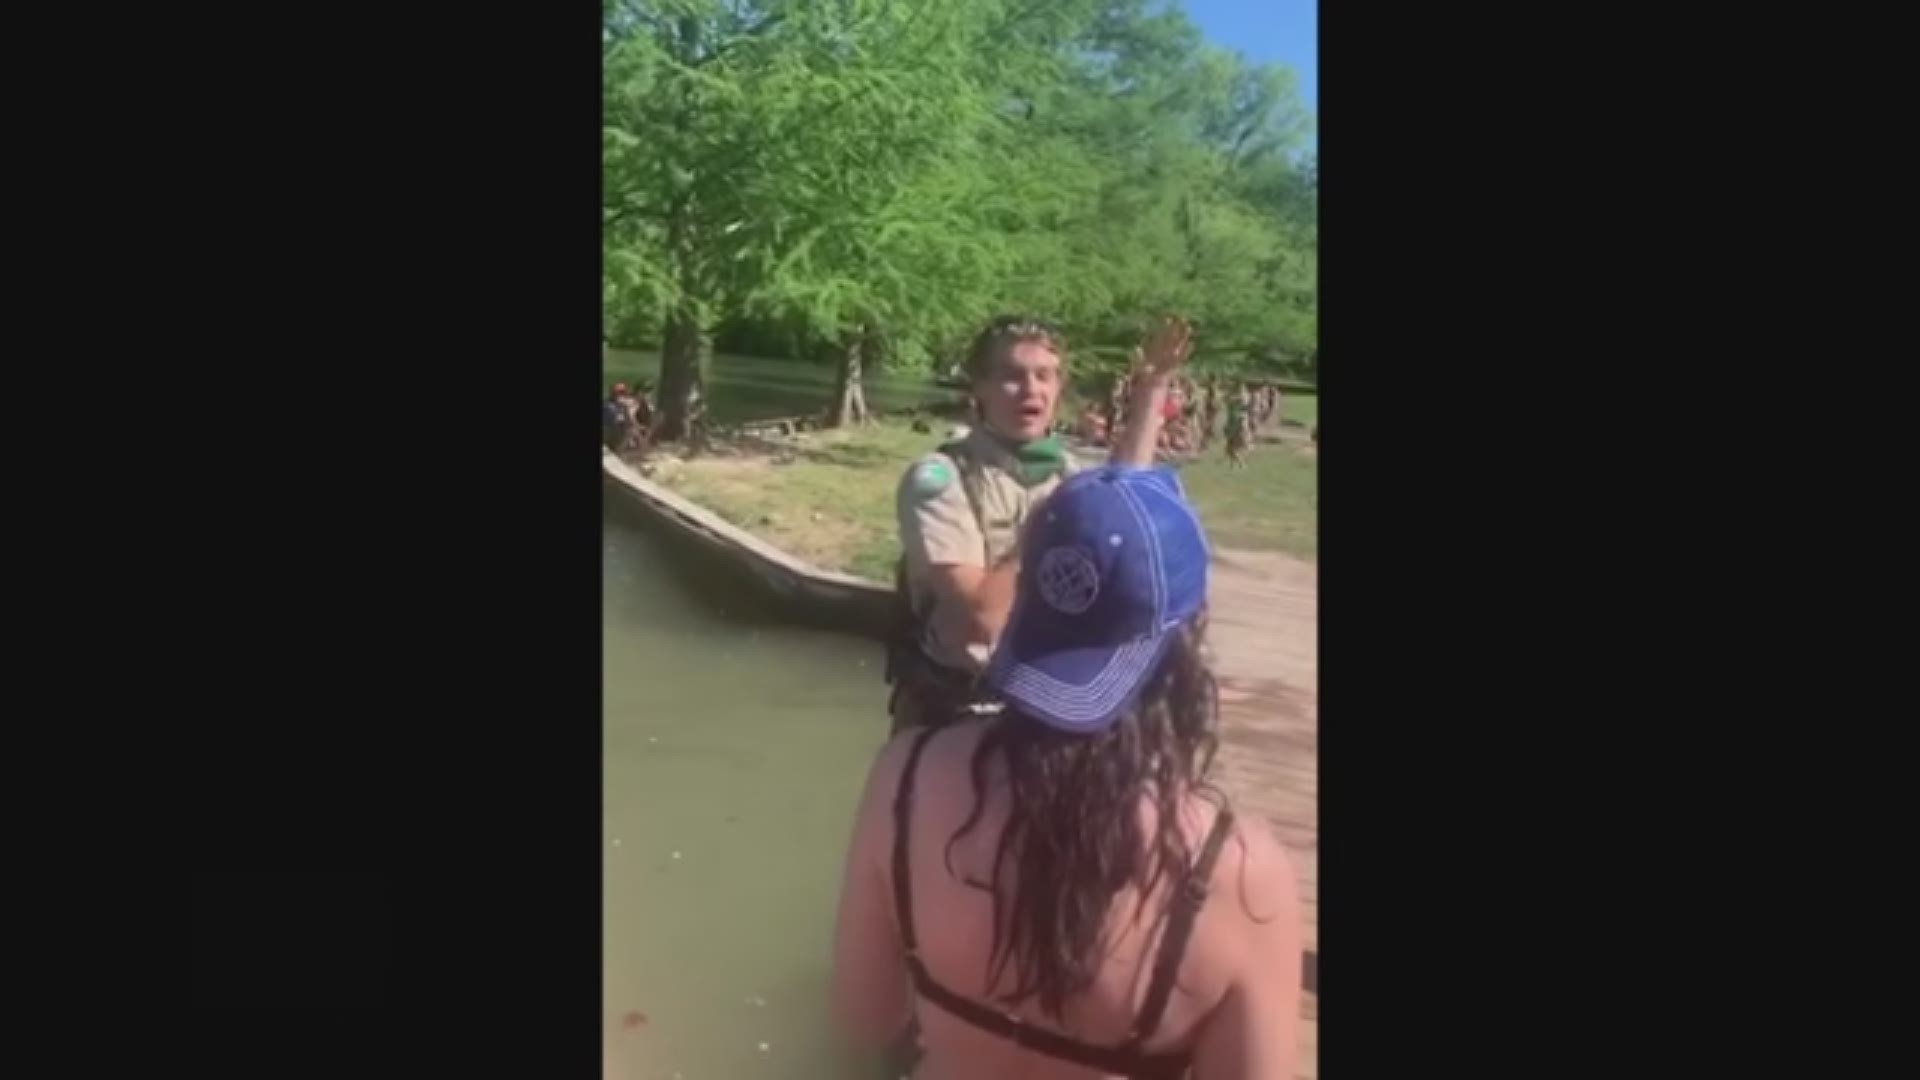 A man has been arrested after he allegedly pushed a park ranger into Lake Austin